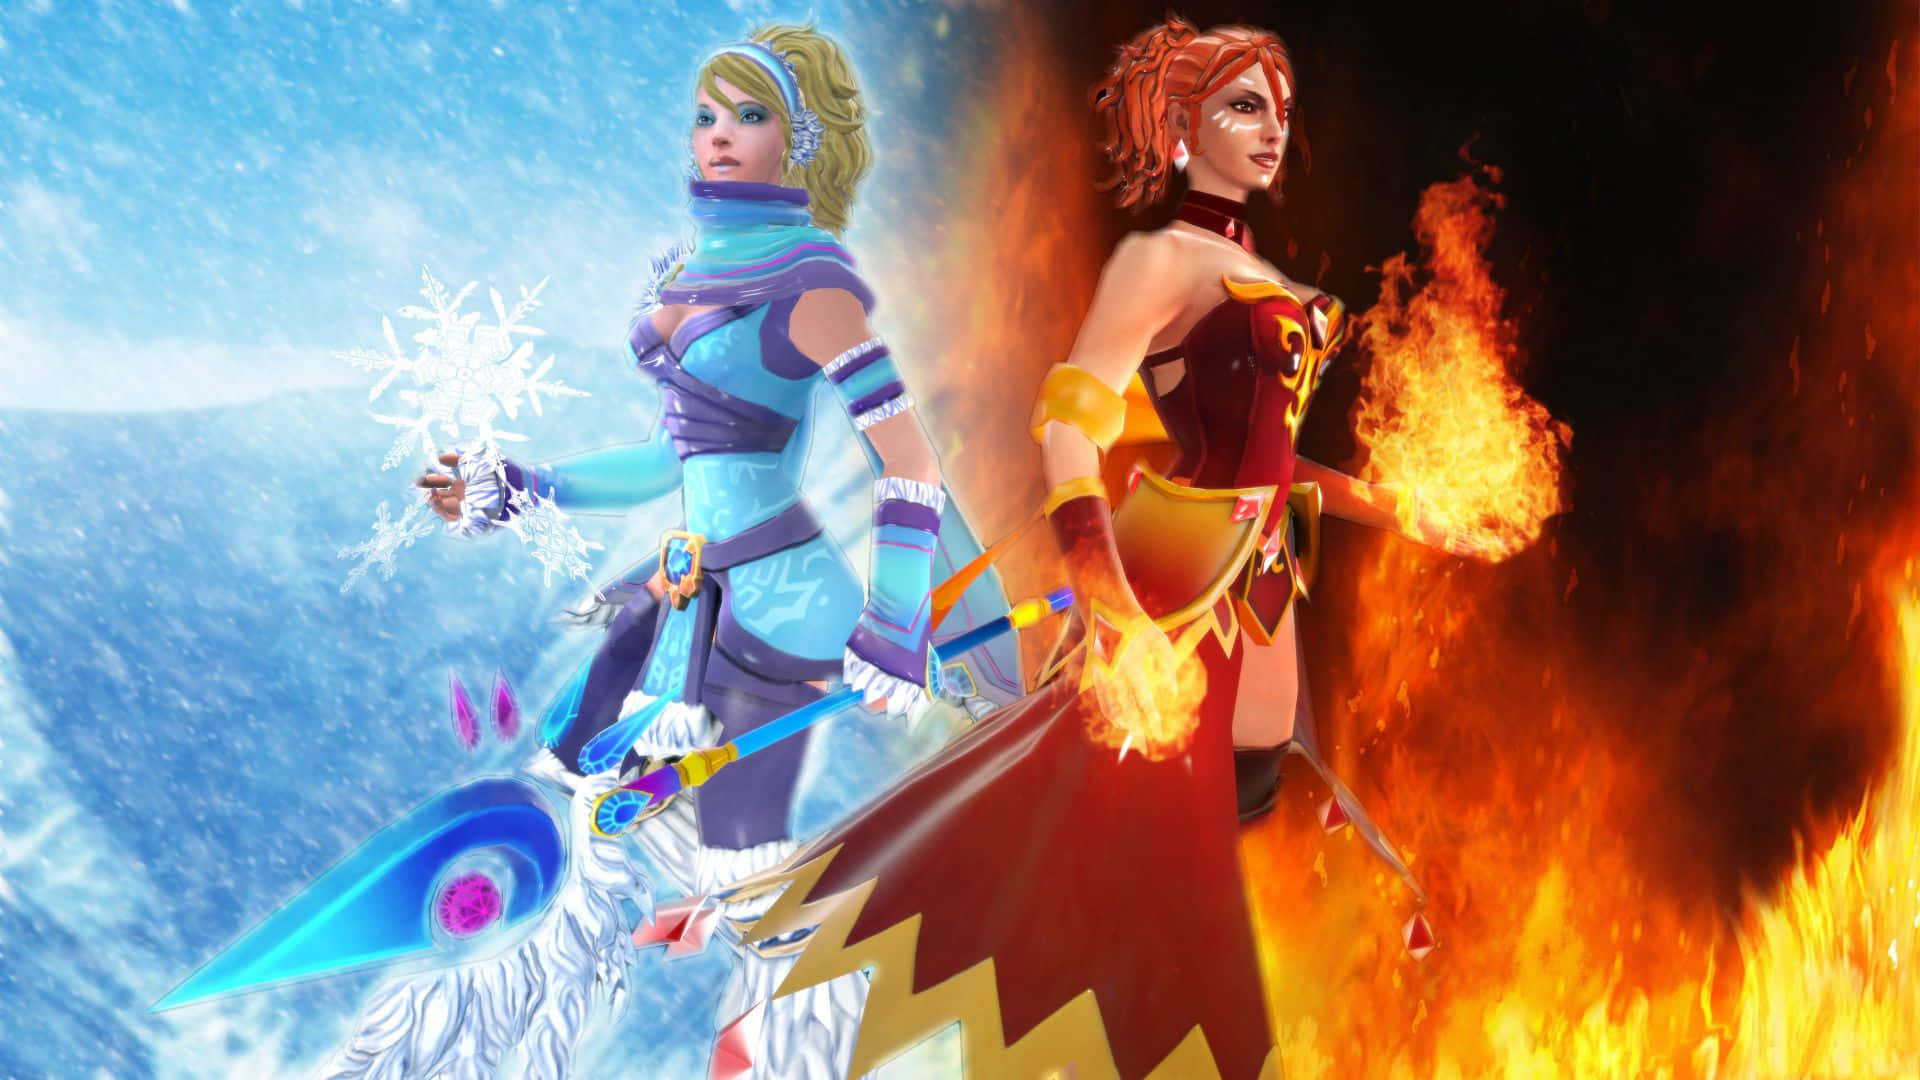 Download Dota 2 Lina Game Character, Dota, Lina, Game, Character Wallpaper  in 720x1280 Resolution